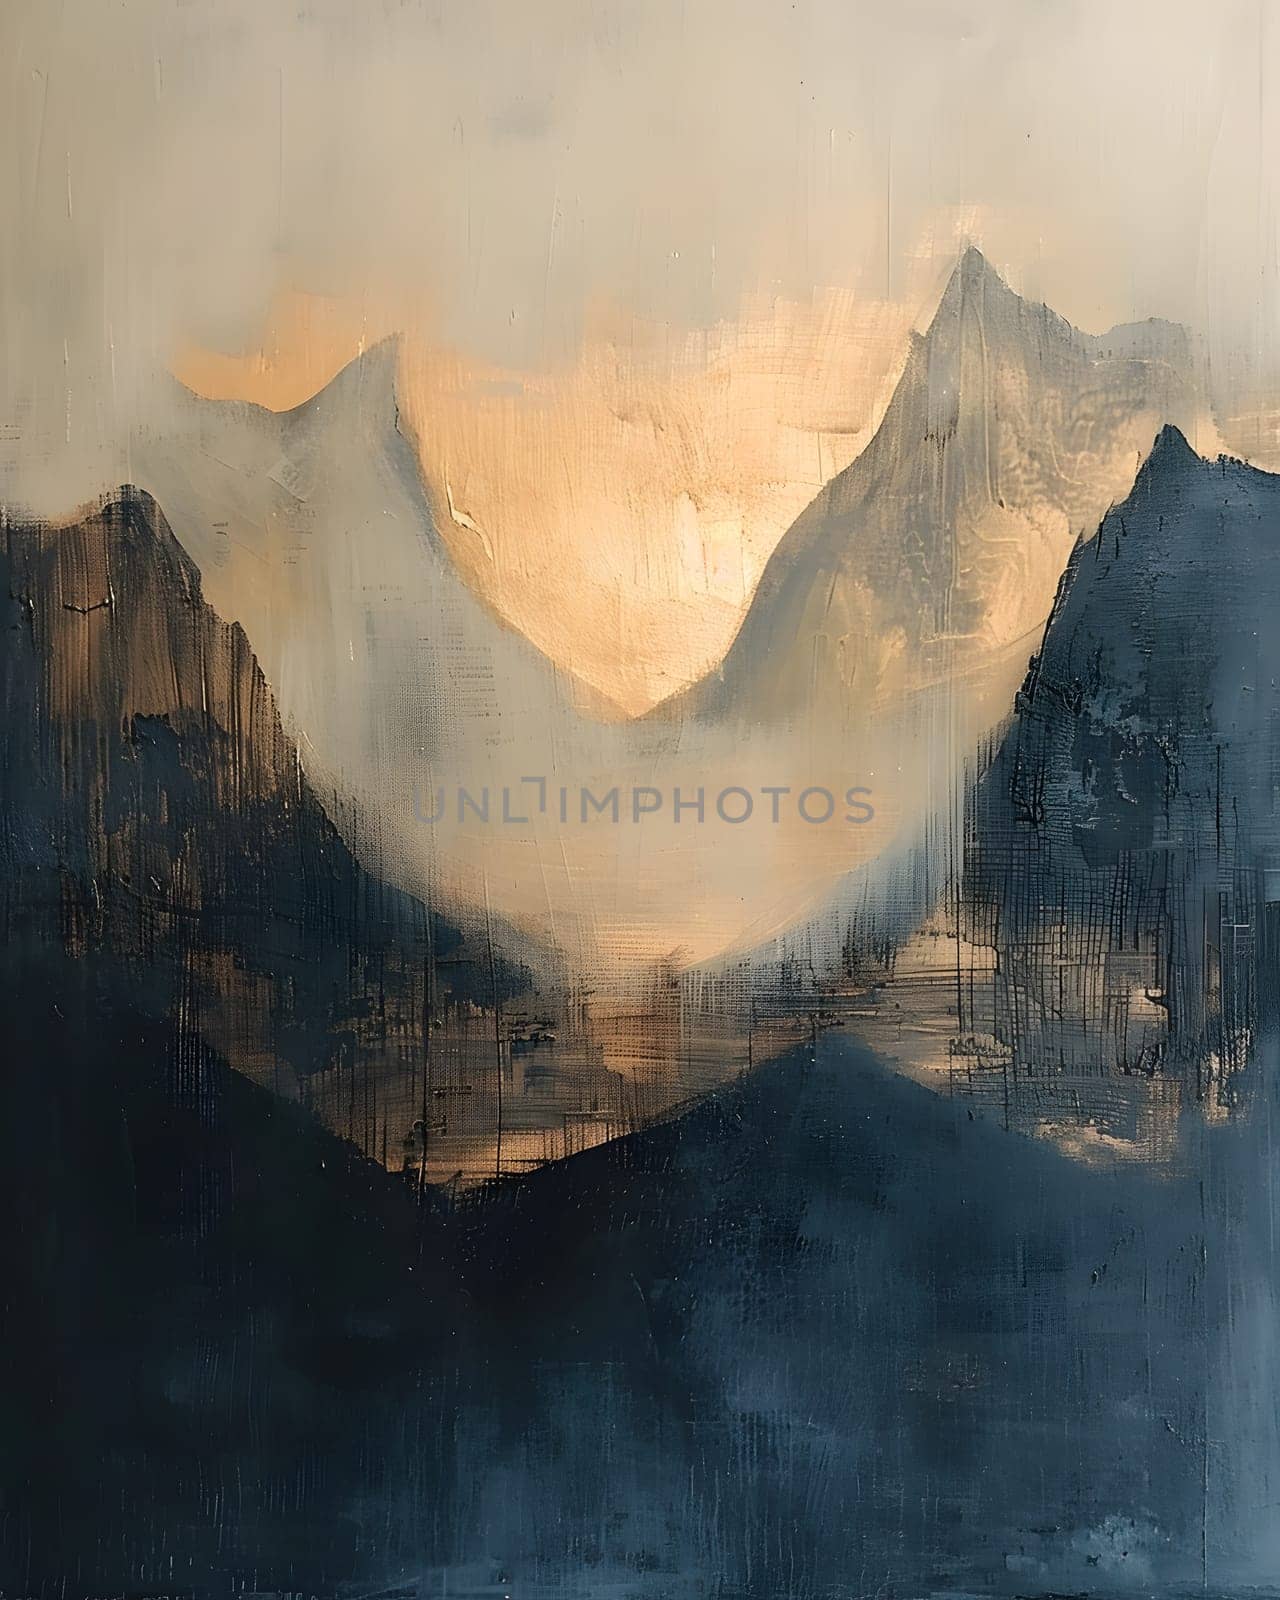 A painting of a mountain range at sunset with dramatic sky and atmosphere by Nadtochiy